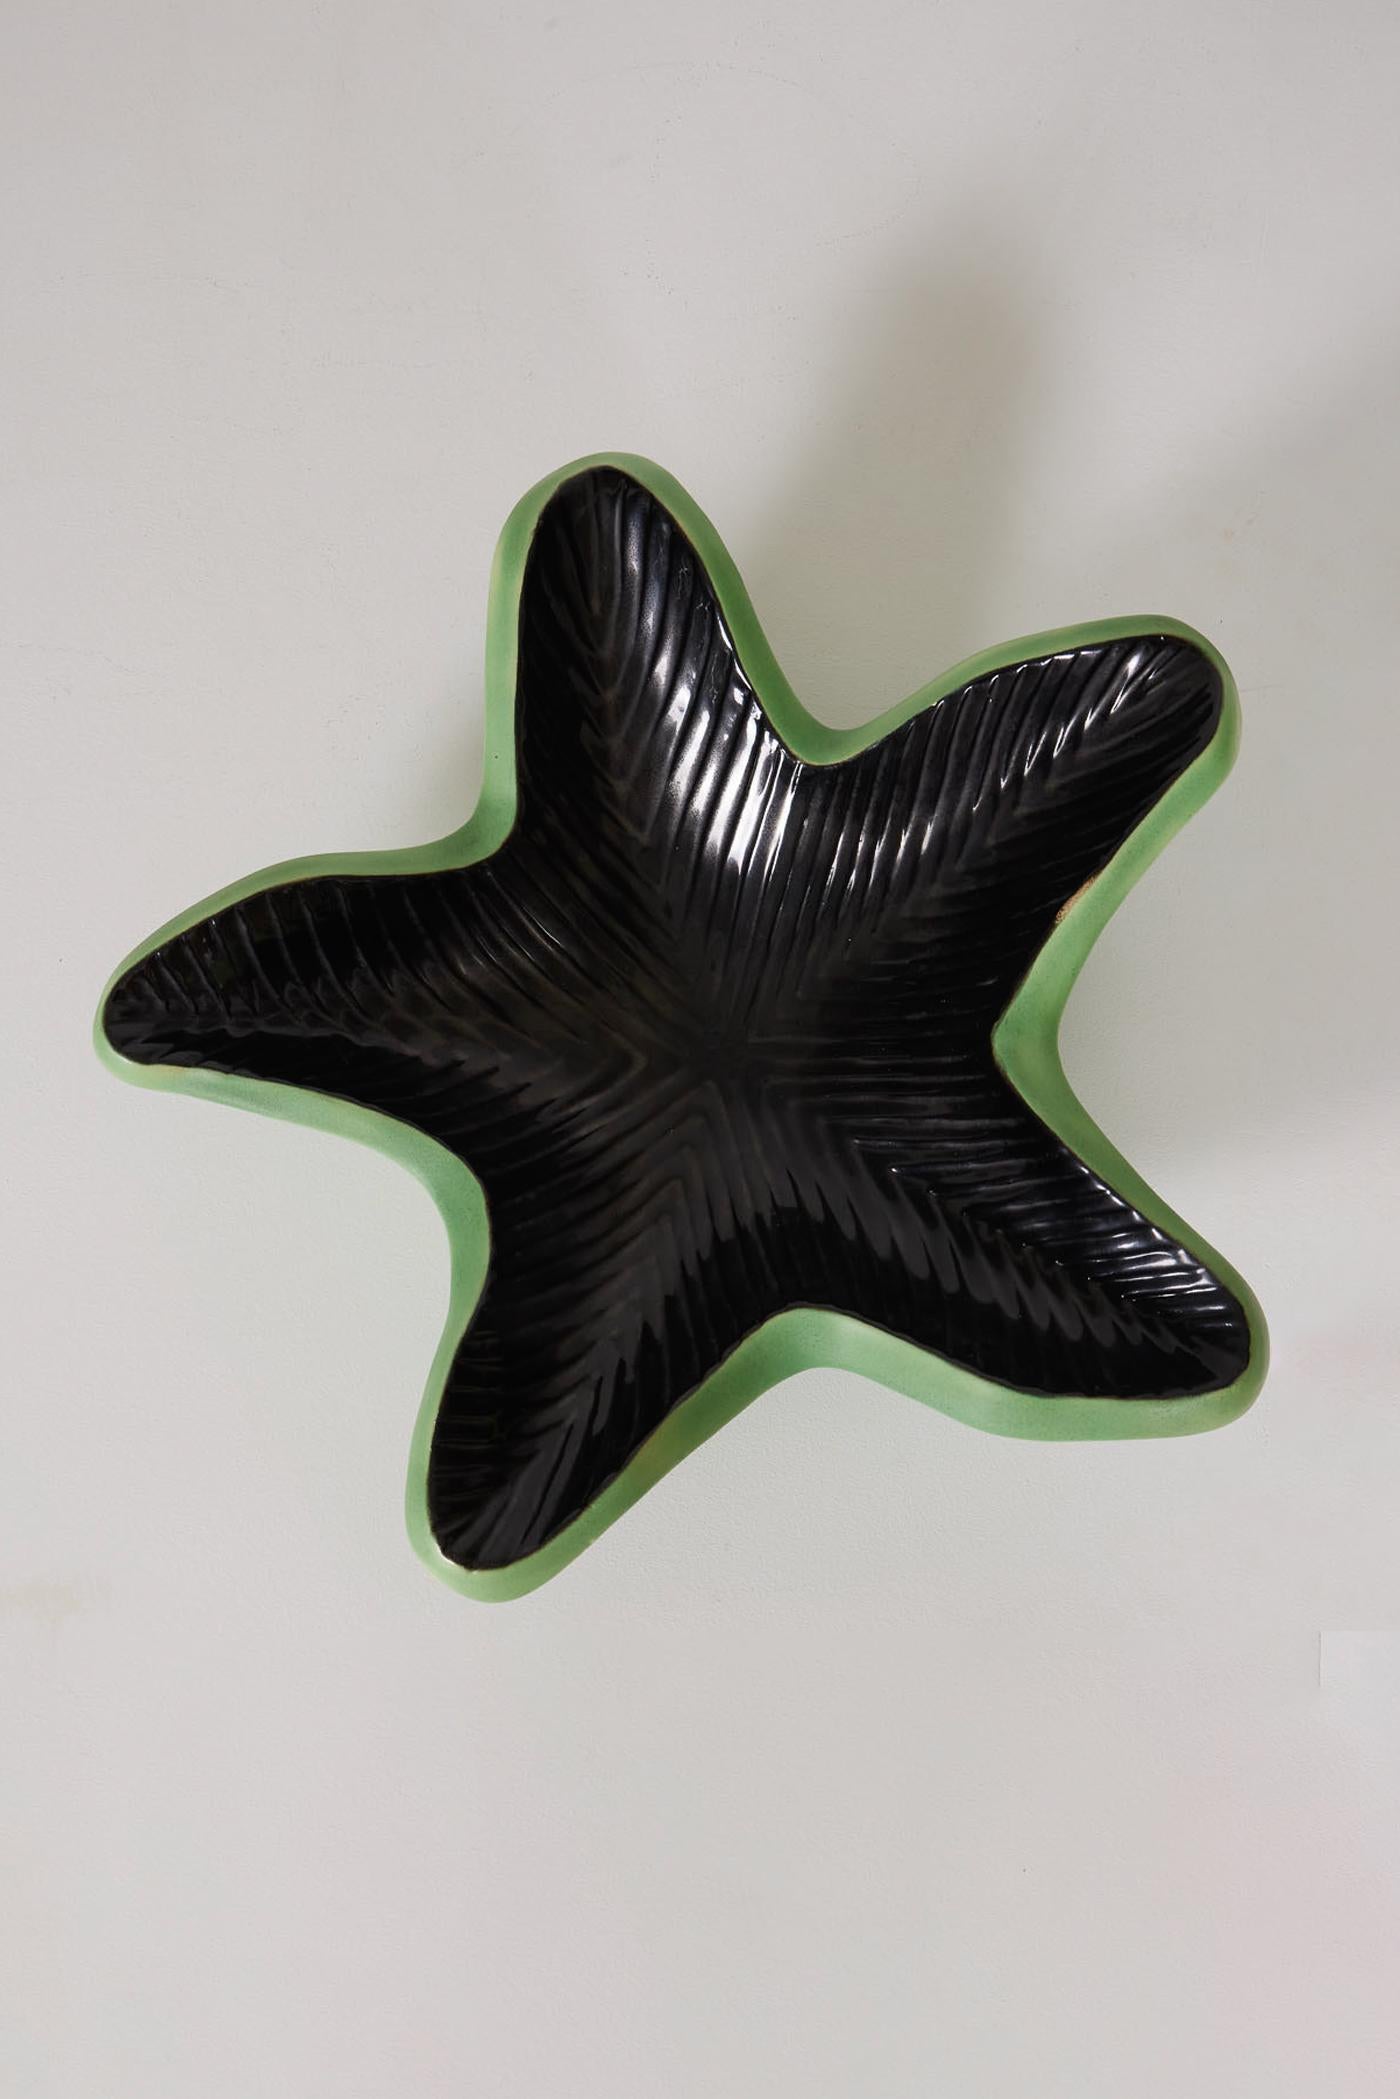 Green and black glazed ceramic catch-all from Maison Elchinger, 1960s. Ceramic in the shape of a starfish in perfect condition.
DV496